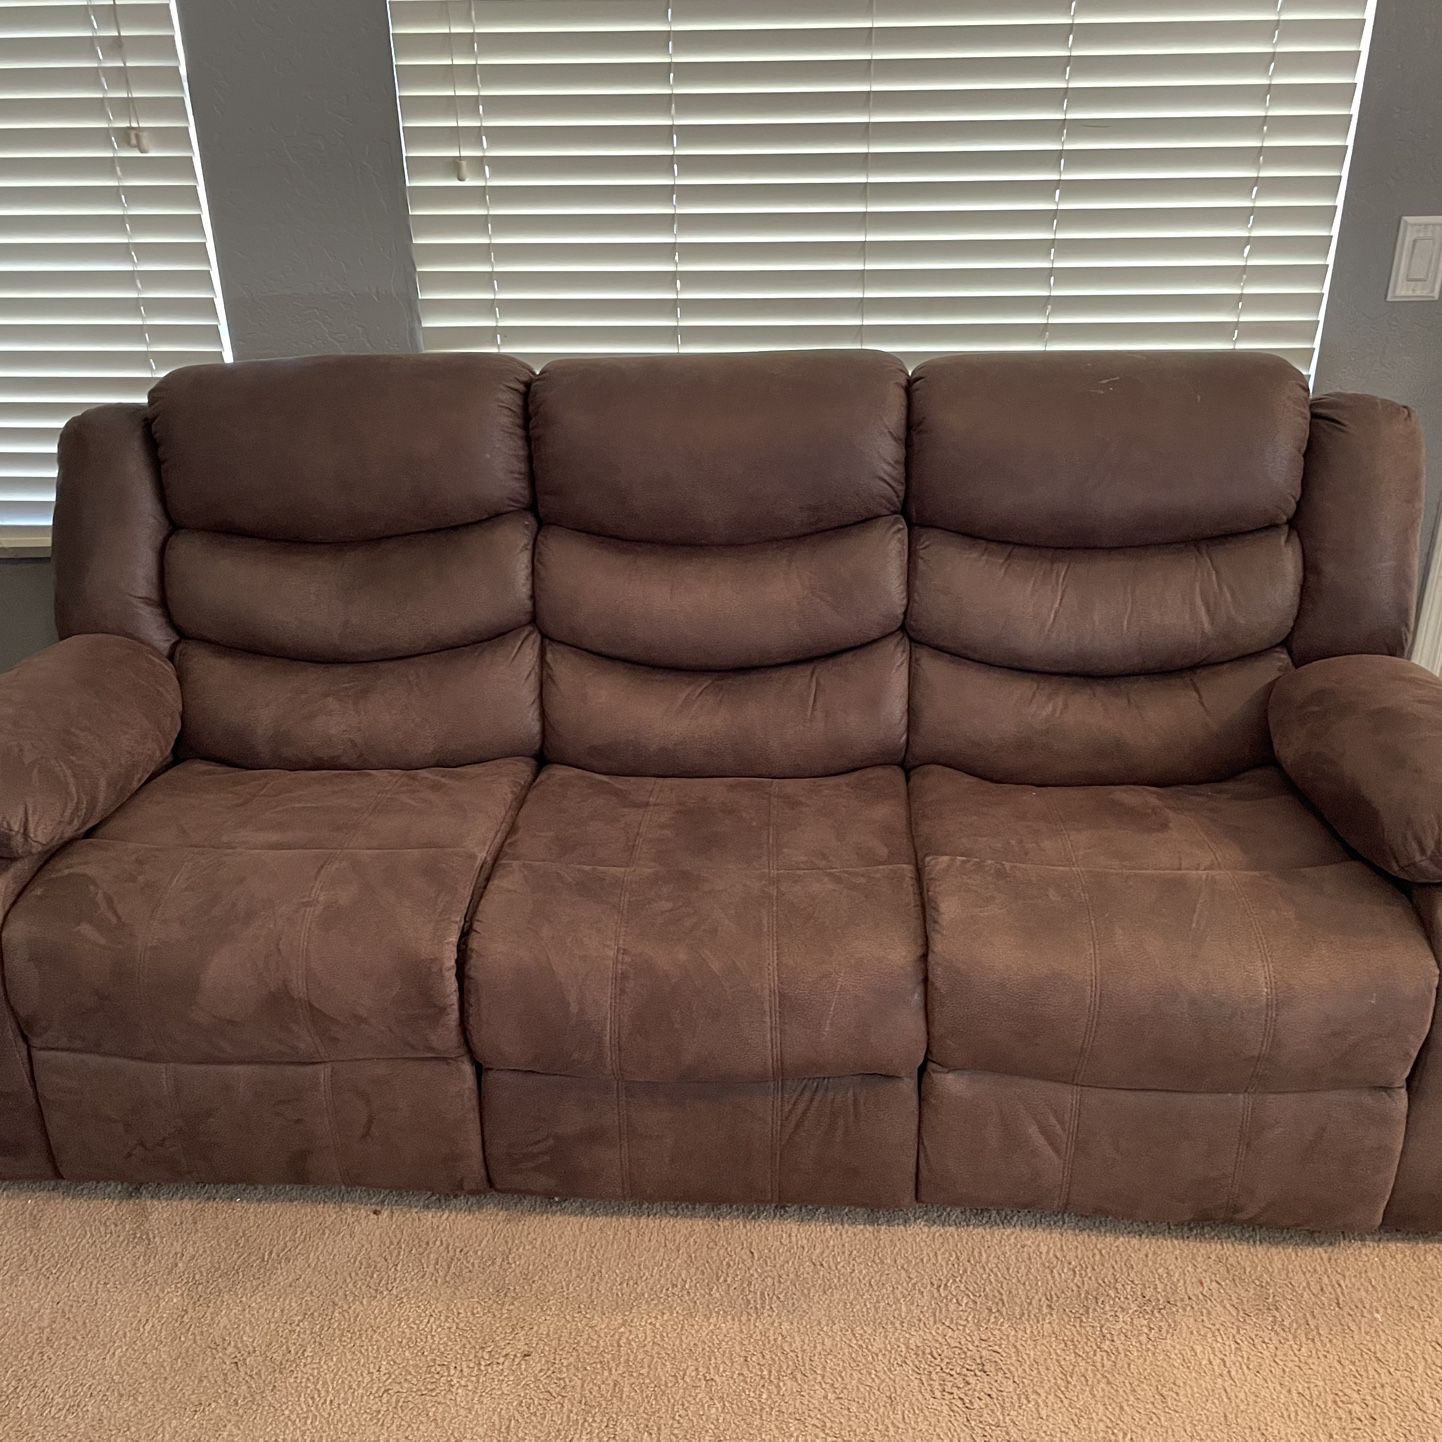 2 Brown Couches With Power Recliners